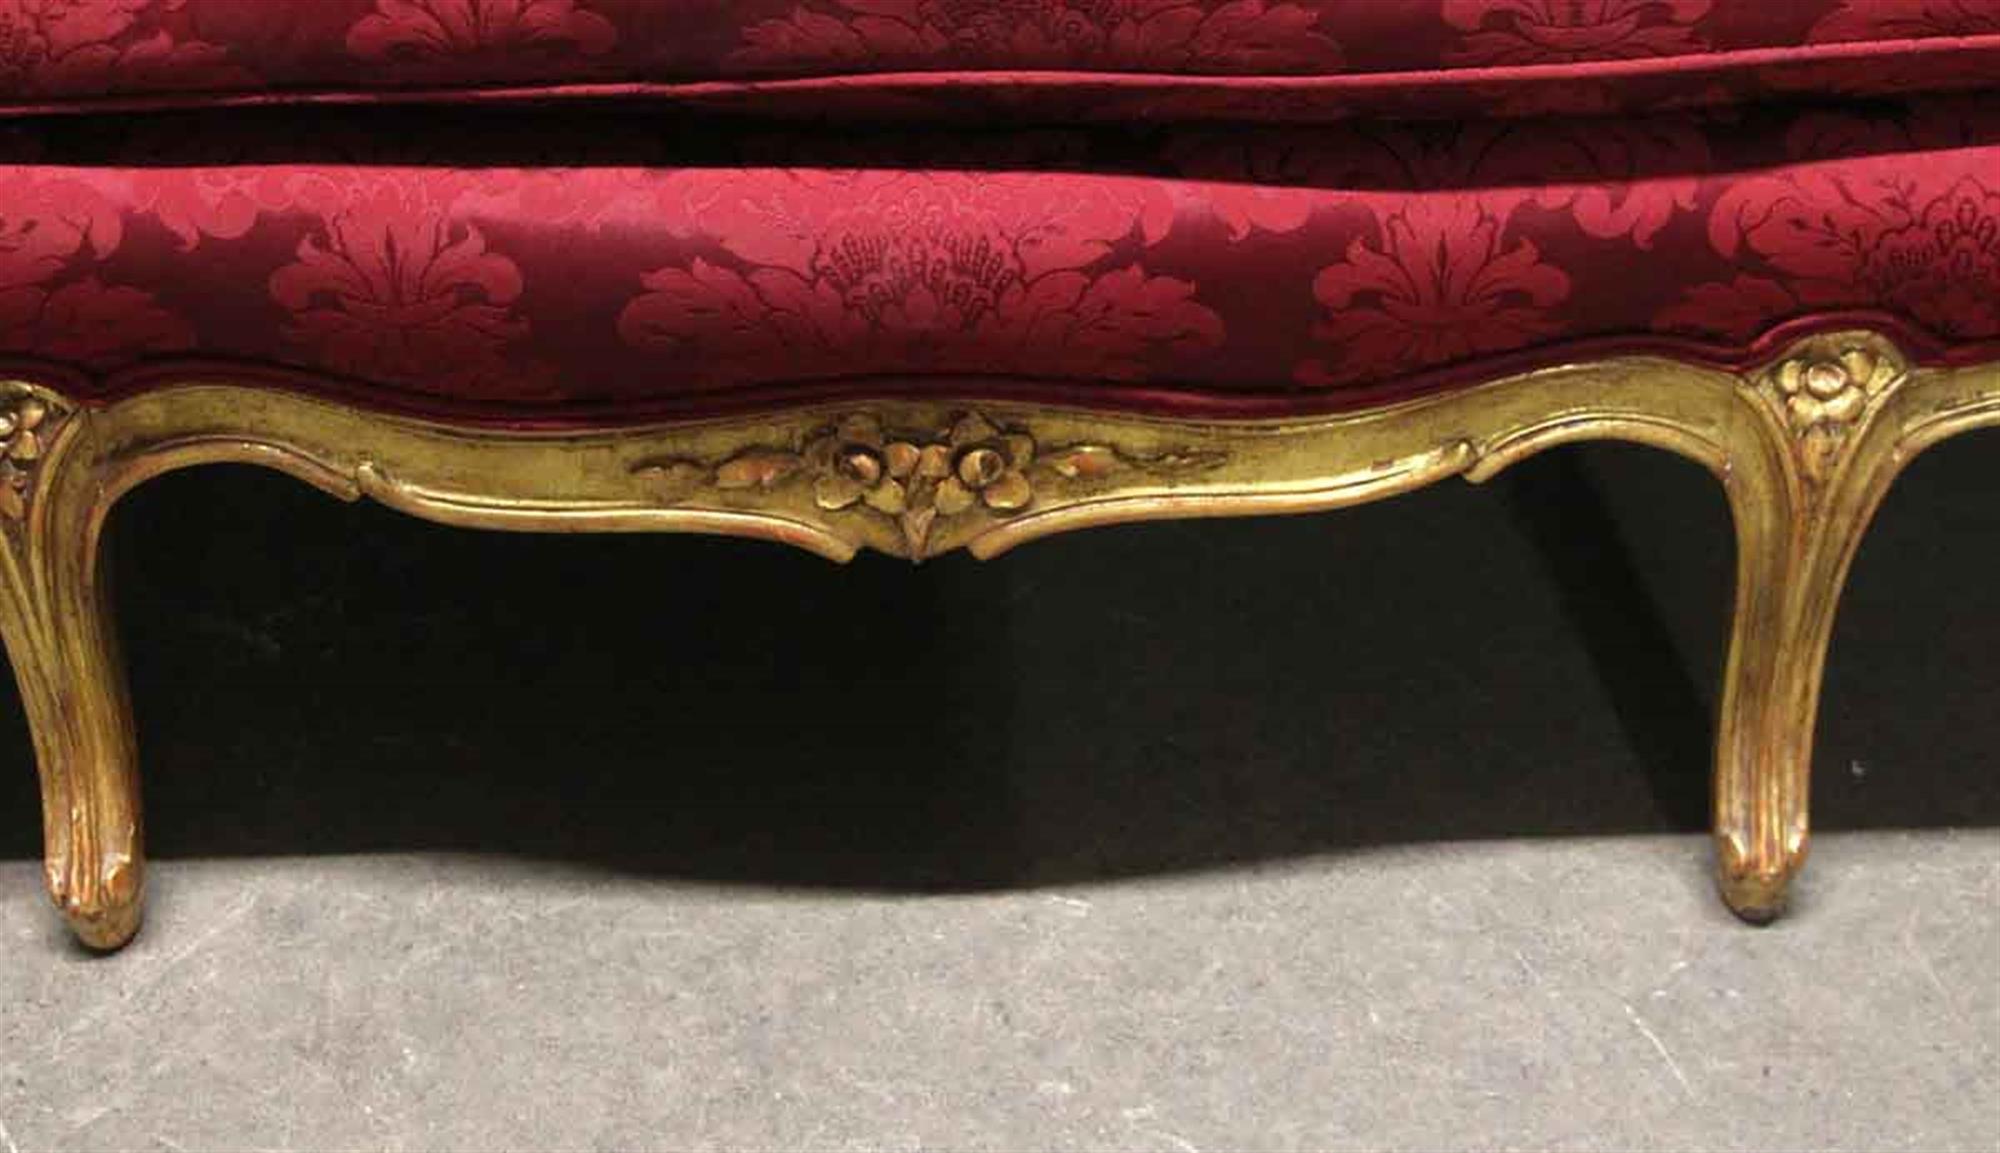 Gilt 1890s Gilded Carved Wood Sofa Couch with Red Floral Upholstery